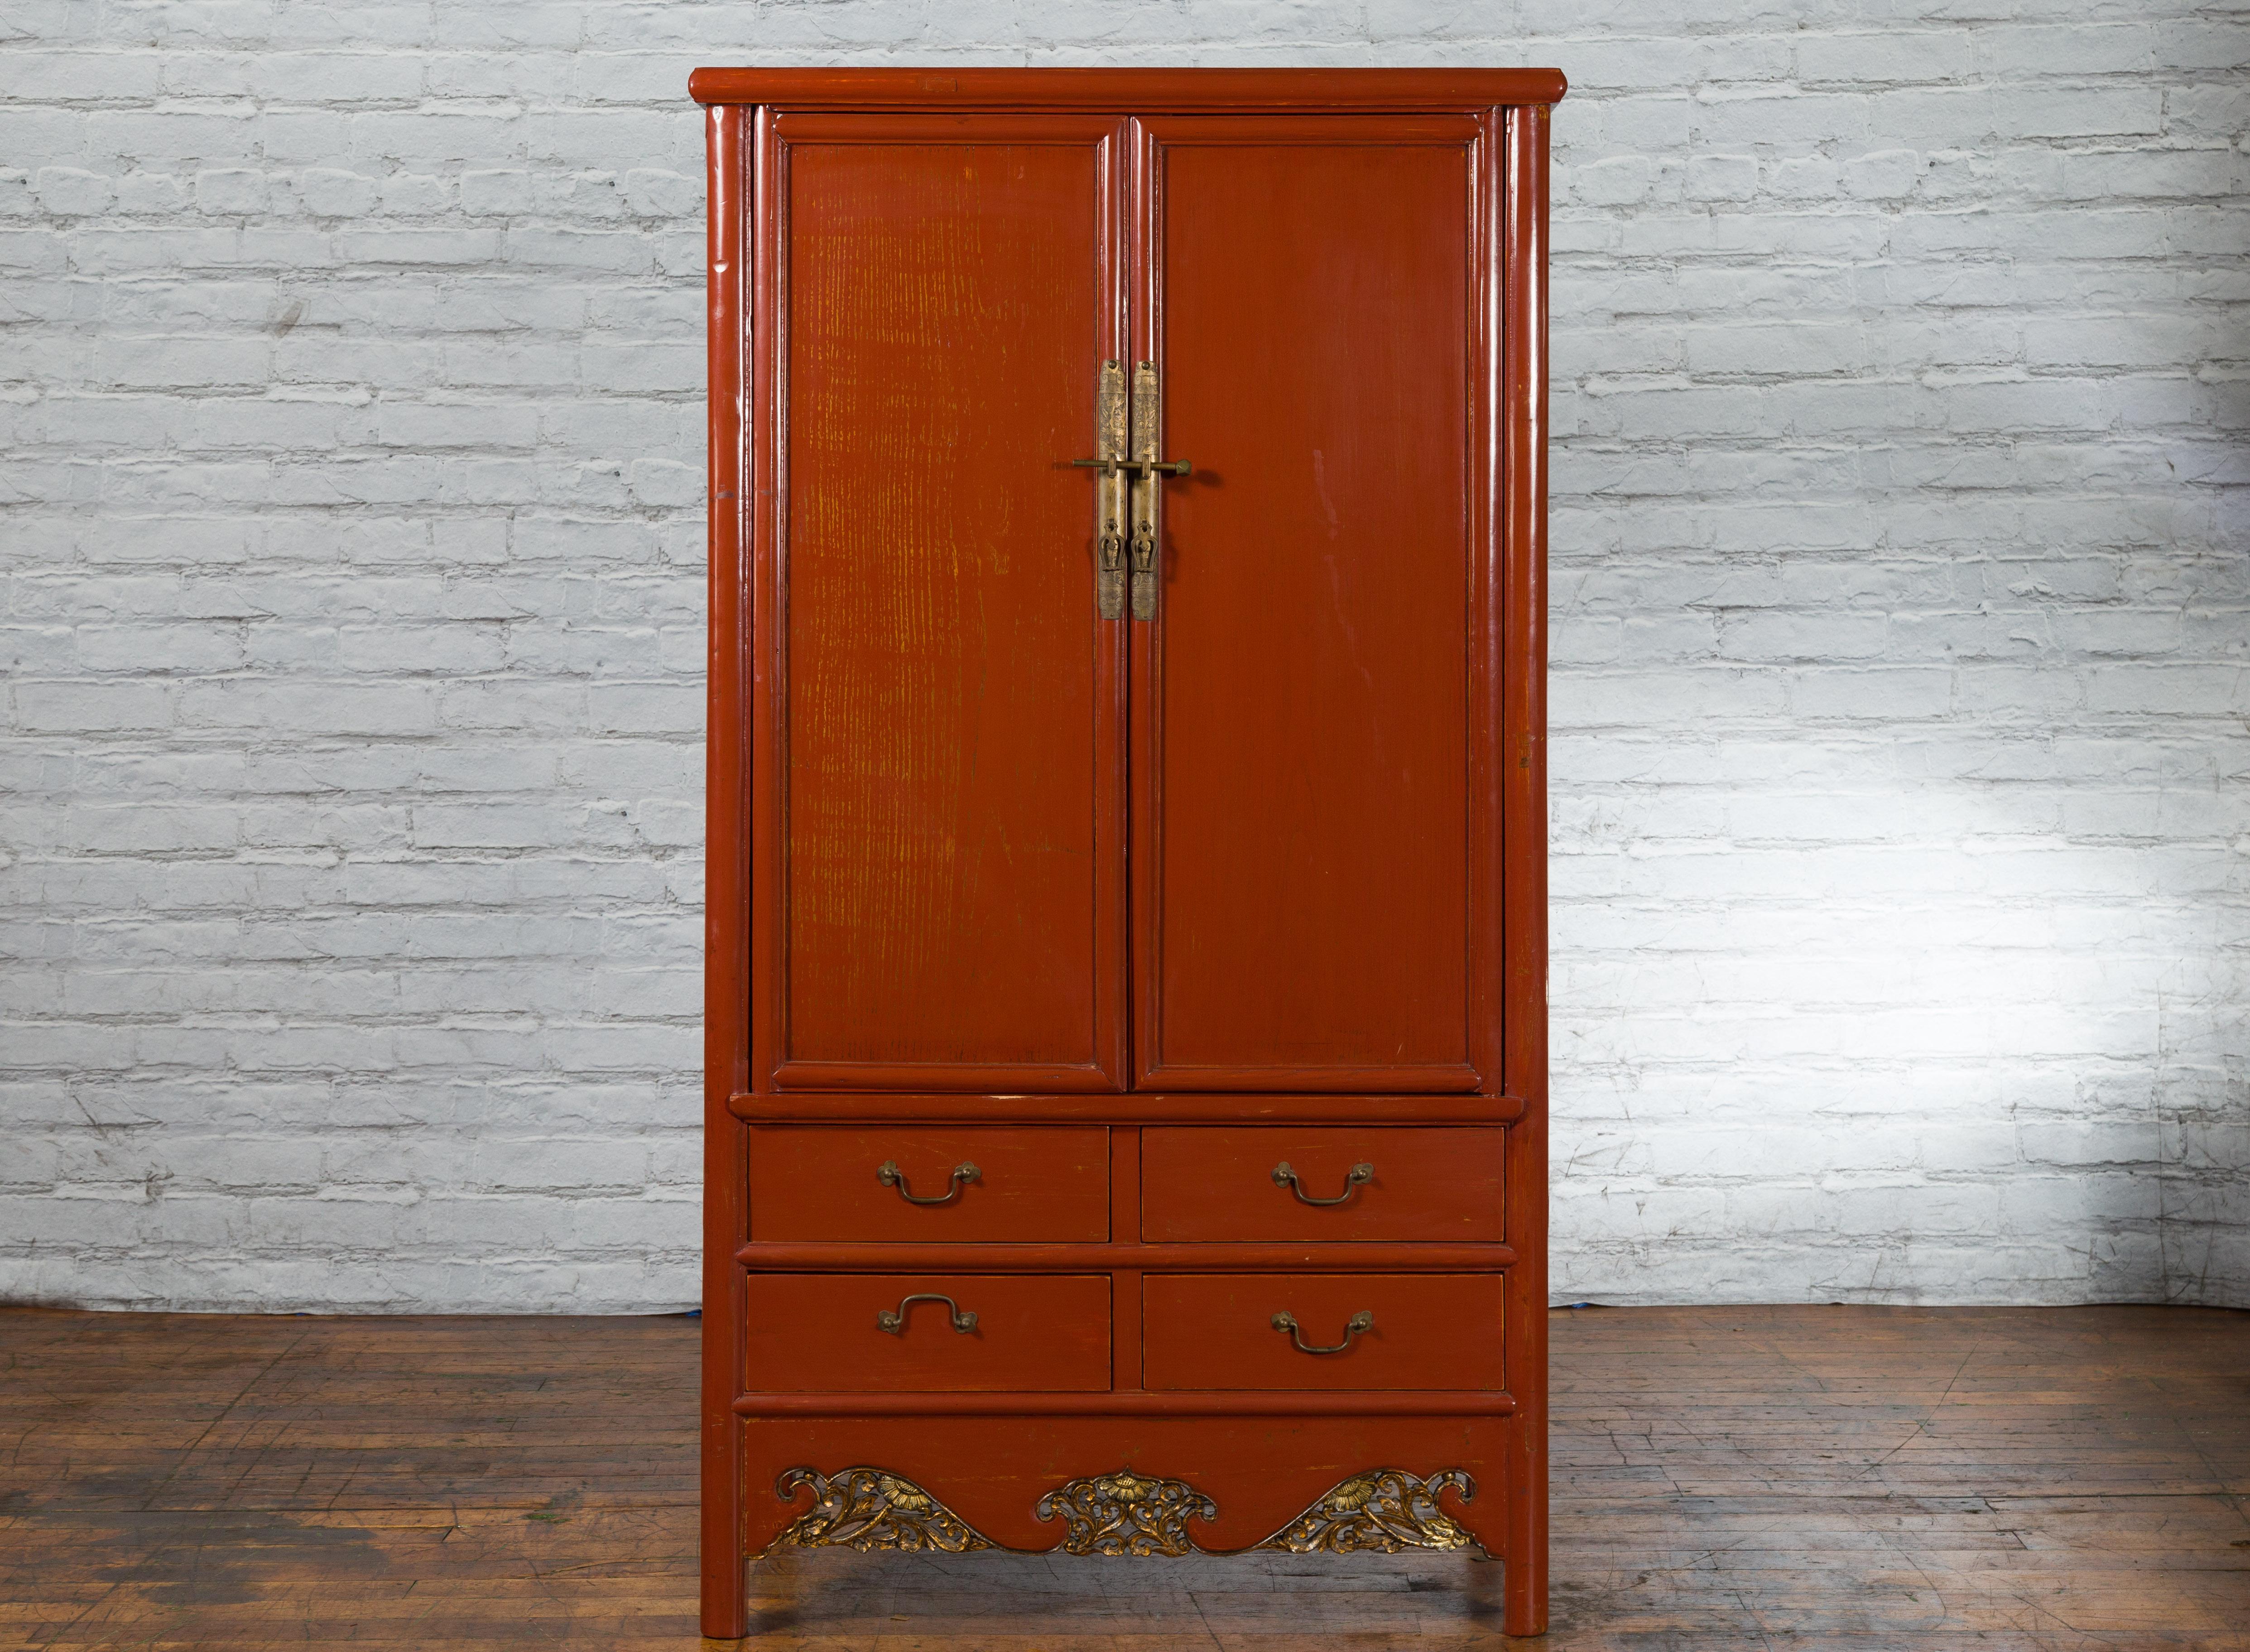 A Chinese Ming Dynasty style red lacquered cabinet from the 19th century, with four drawers, ornate brass hardware and carved apron. Created in China during the Qing Dynasty, this Ming style cabinet attracts our attention with its red lacquer and